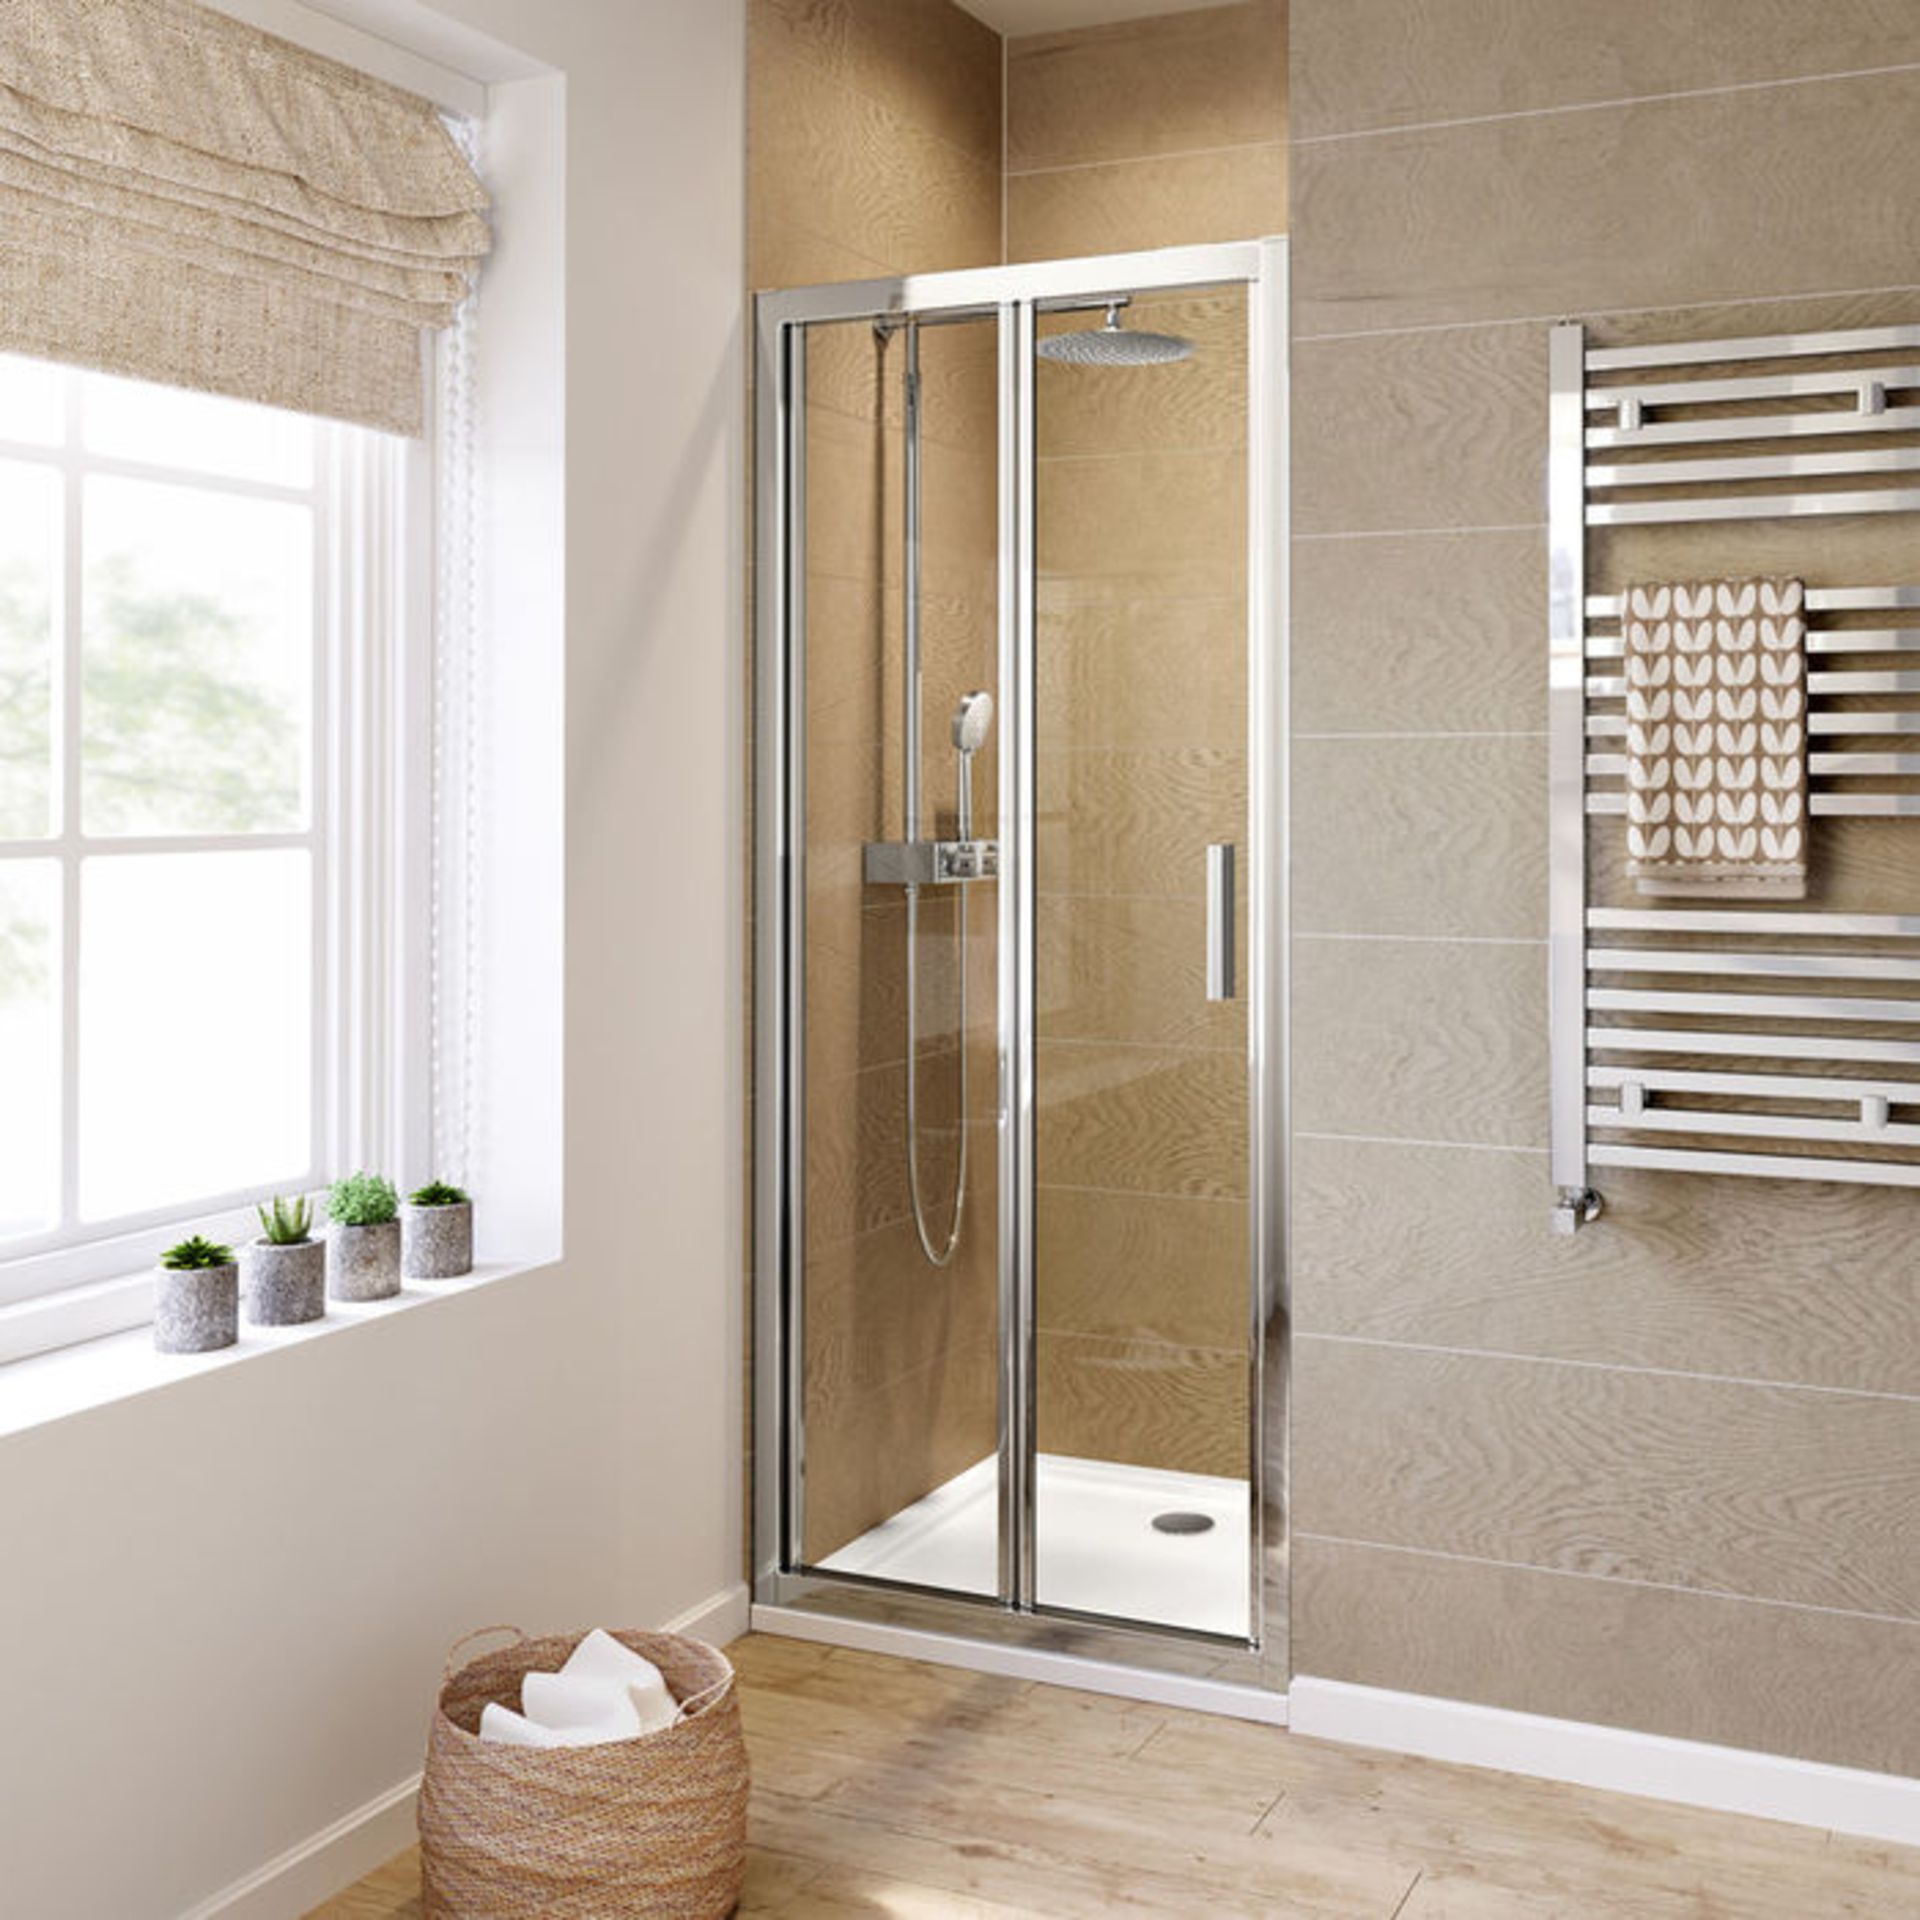 (AH36) 800mm - 6mm - Elements EasyClean Bifold Shower Door. RRP £299.99. 6mm Safety Glass - Single- - Image 2 of 4